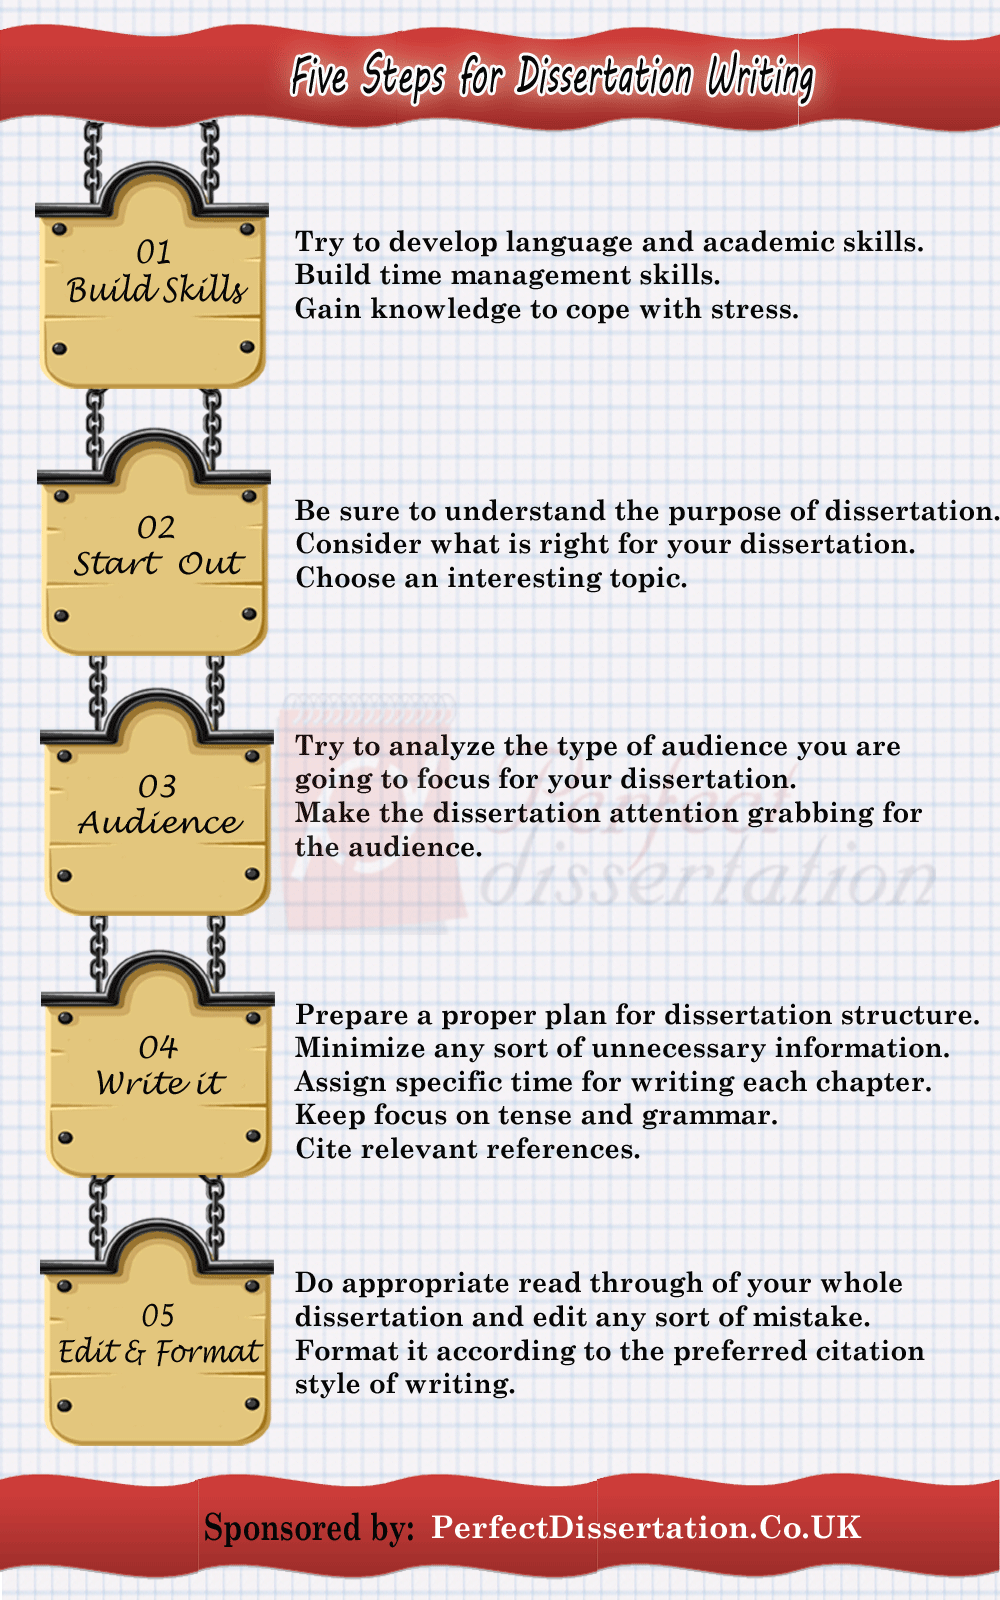 Five Steps for dissertation writing Infographic